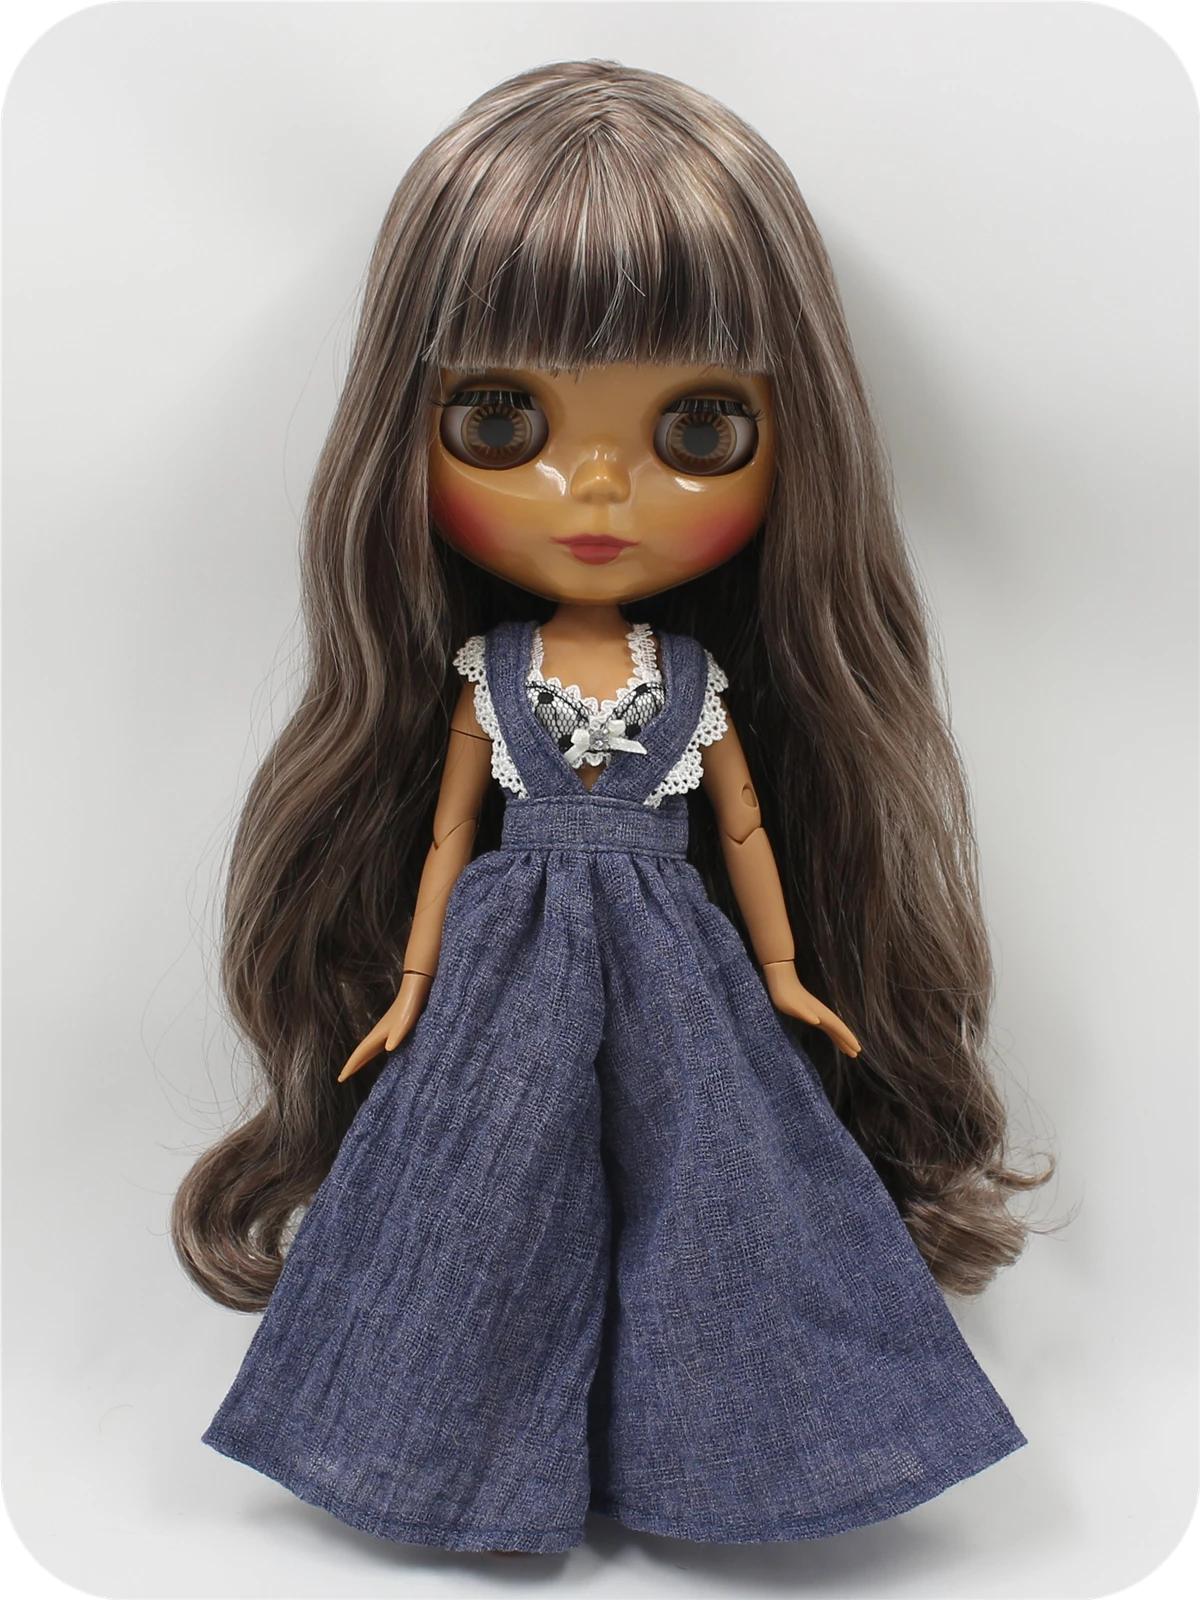 Neo Blythe Doll with Multi-Color Hair, Dark Skin, Shiny Face & Jointed Body 2